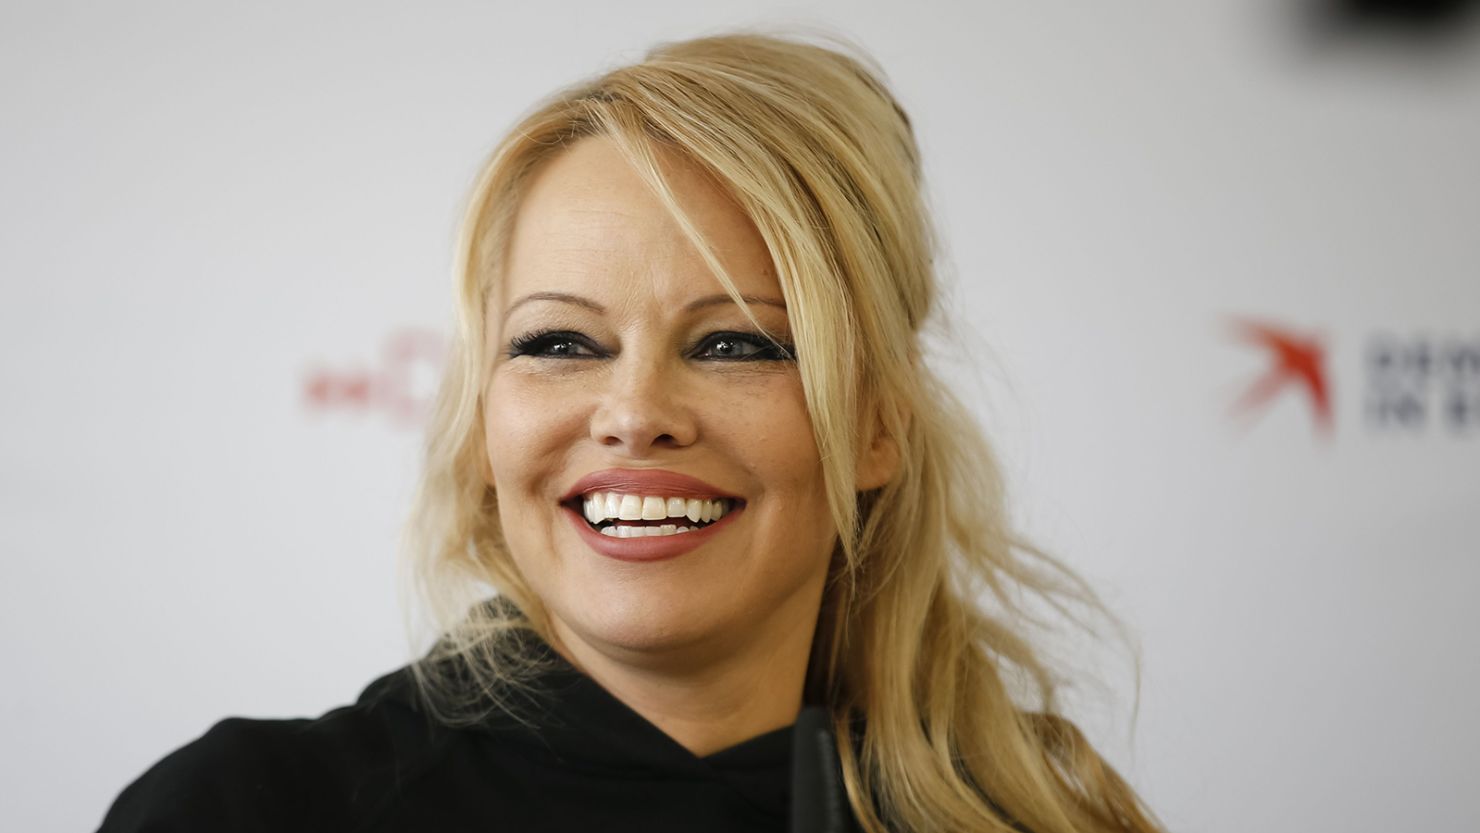 Actress Pamela Anderson holds a news conference at the "Elevate" Festival on February 27, 2019, in Graz, Austria.